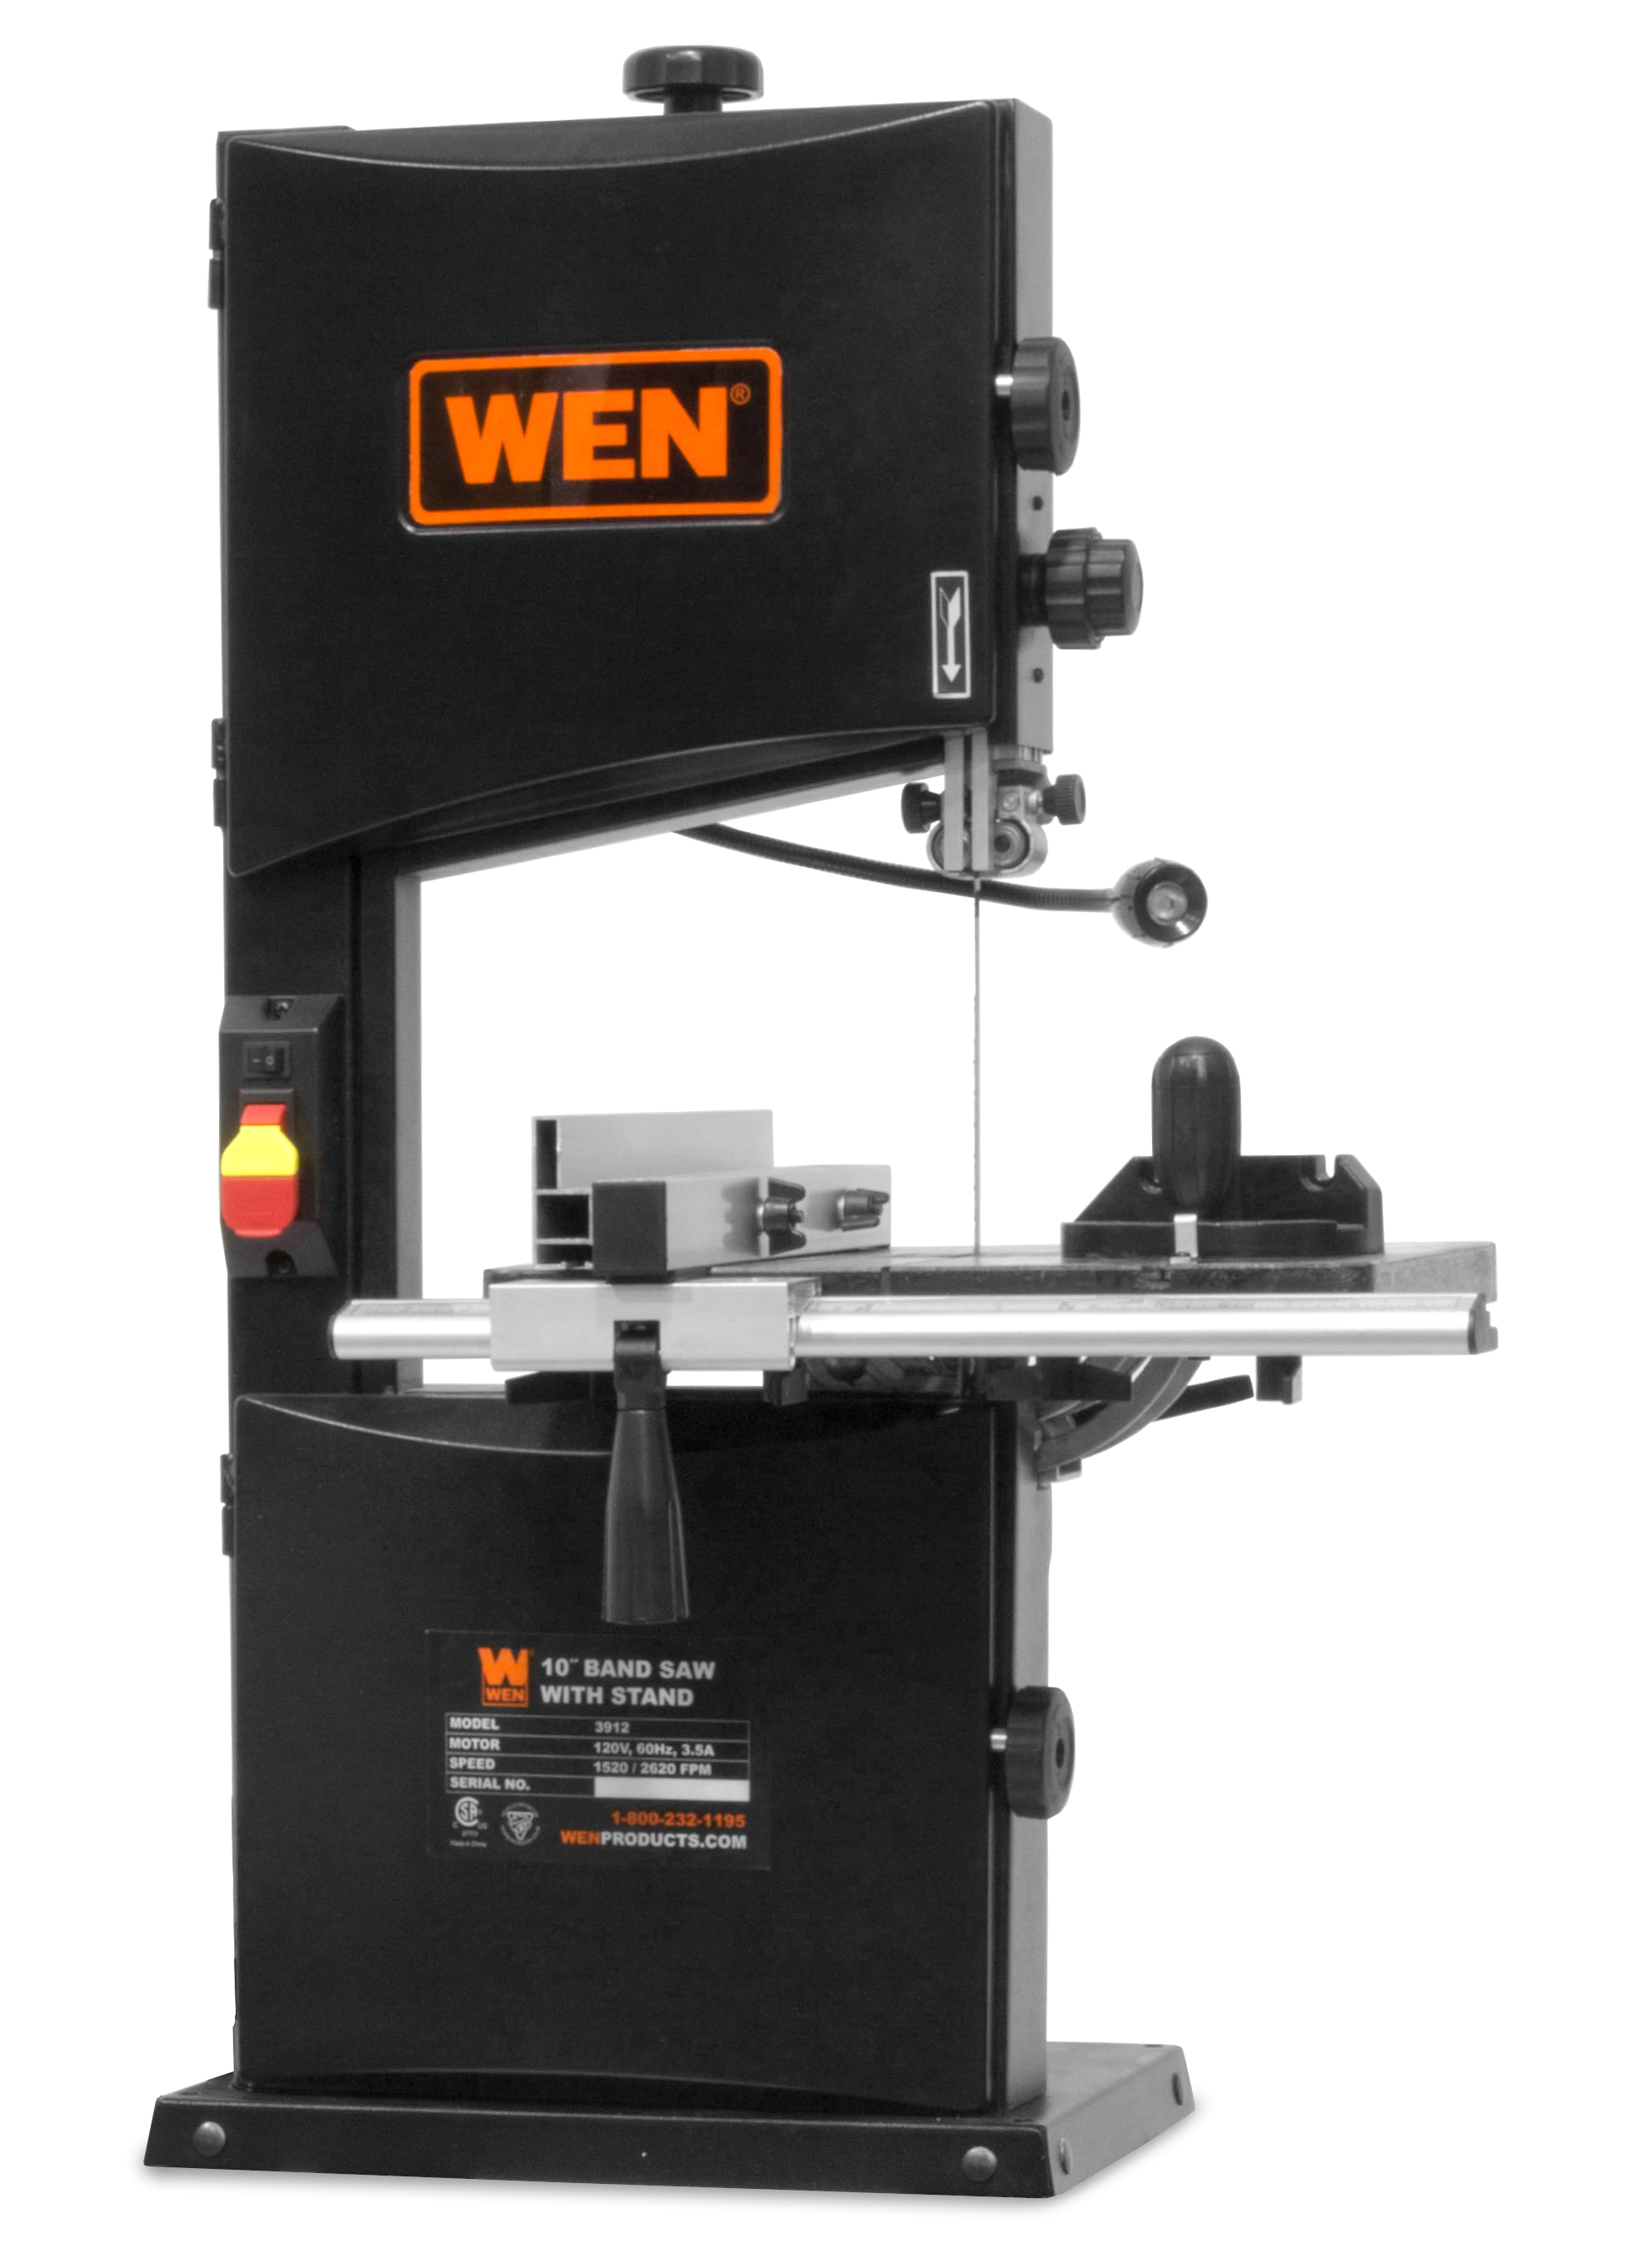 WEN 3.5-Amp 10-Inch Two-Speed Band Saw with Stand and Worklight, 3962 - image 2 of 7